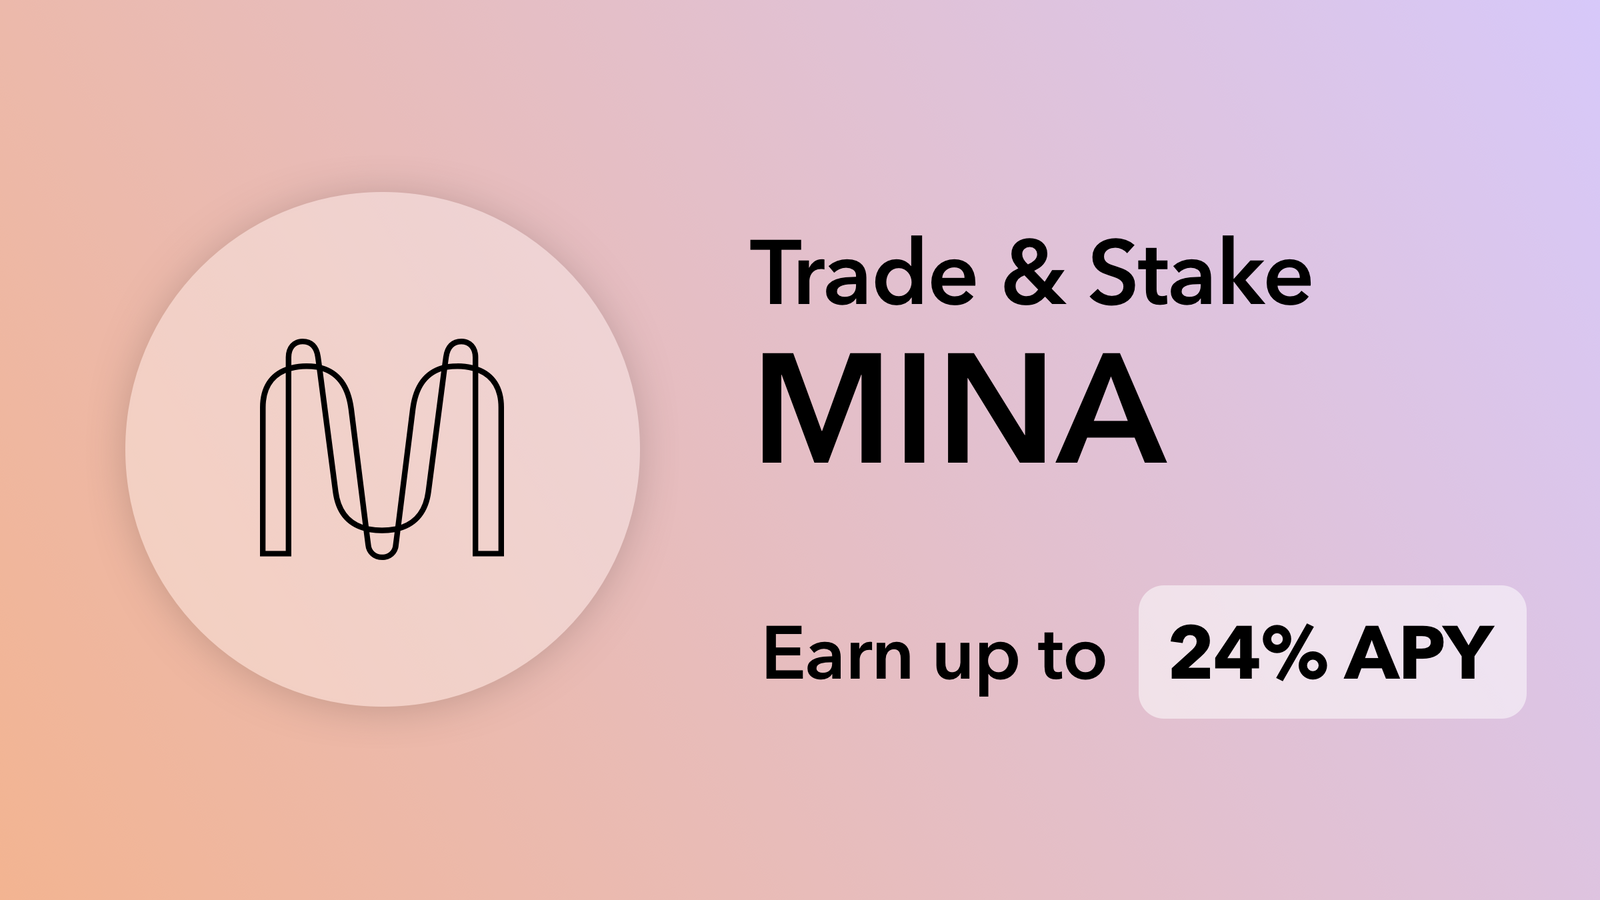 Introducing MINA Trading & Staking on CoinList